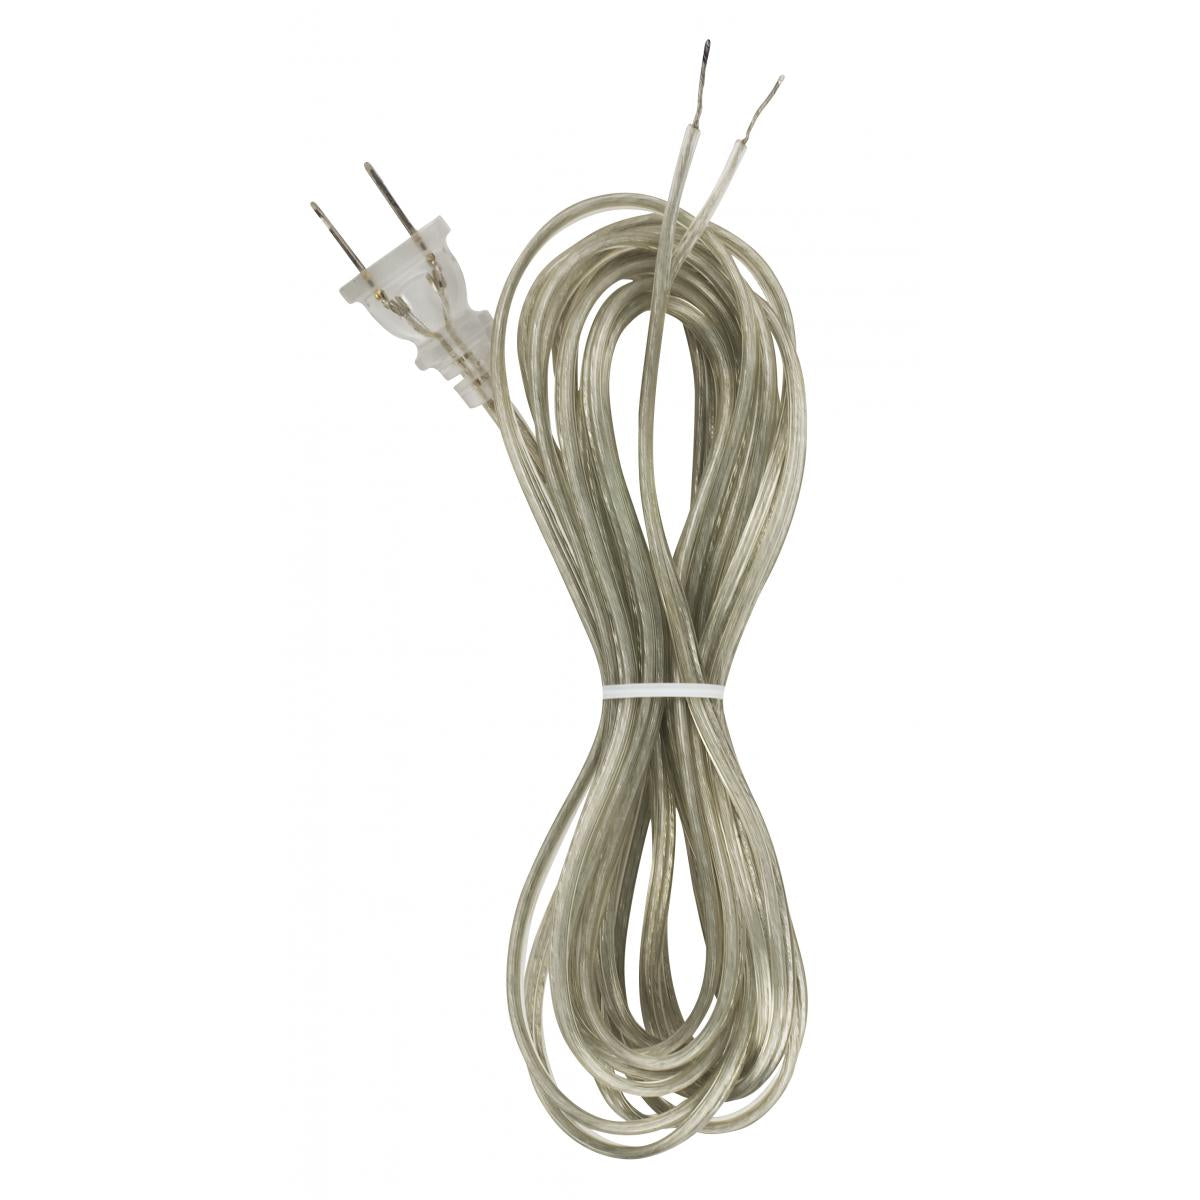 Satco 90-1532 18/2 SPT-1-105C All Cord Sets - Molded Plug - Tinned Tips 3/4" Strip with 2" Slit 100 Ctn. 15 Ft.